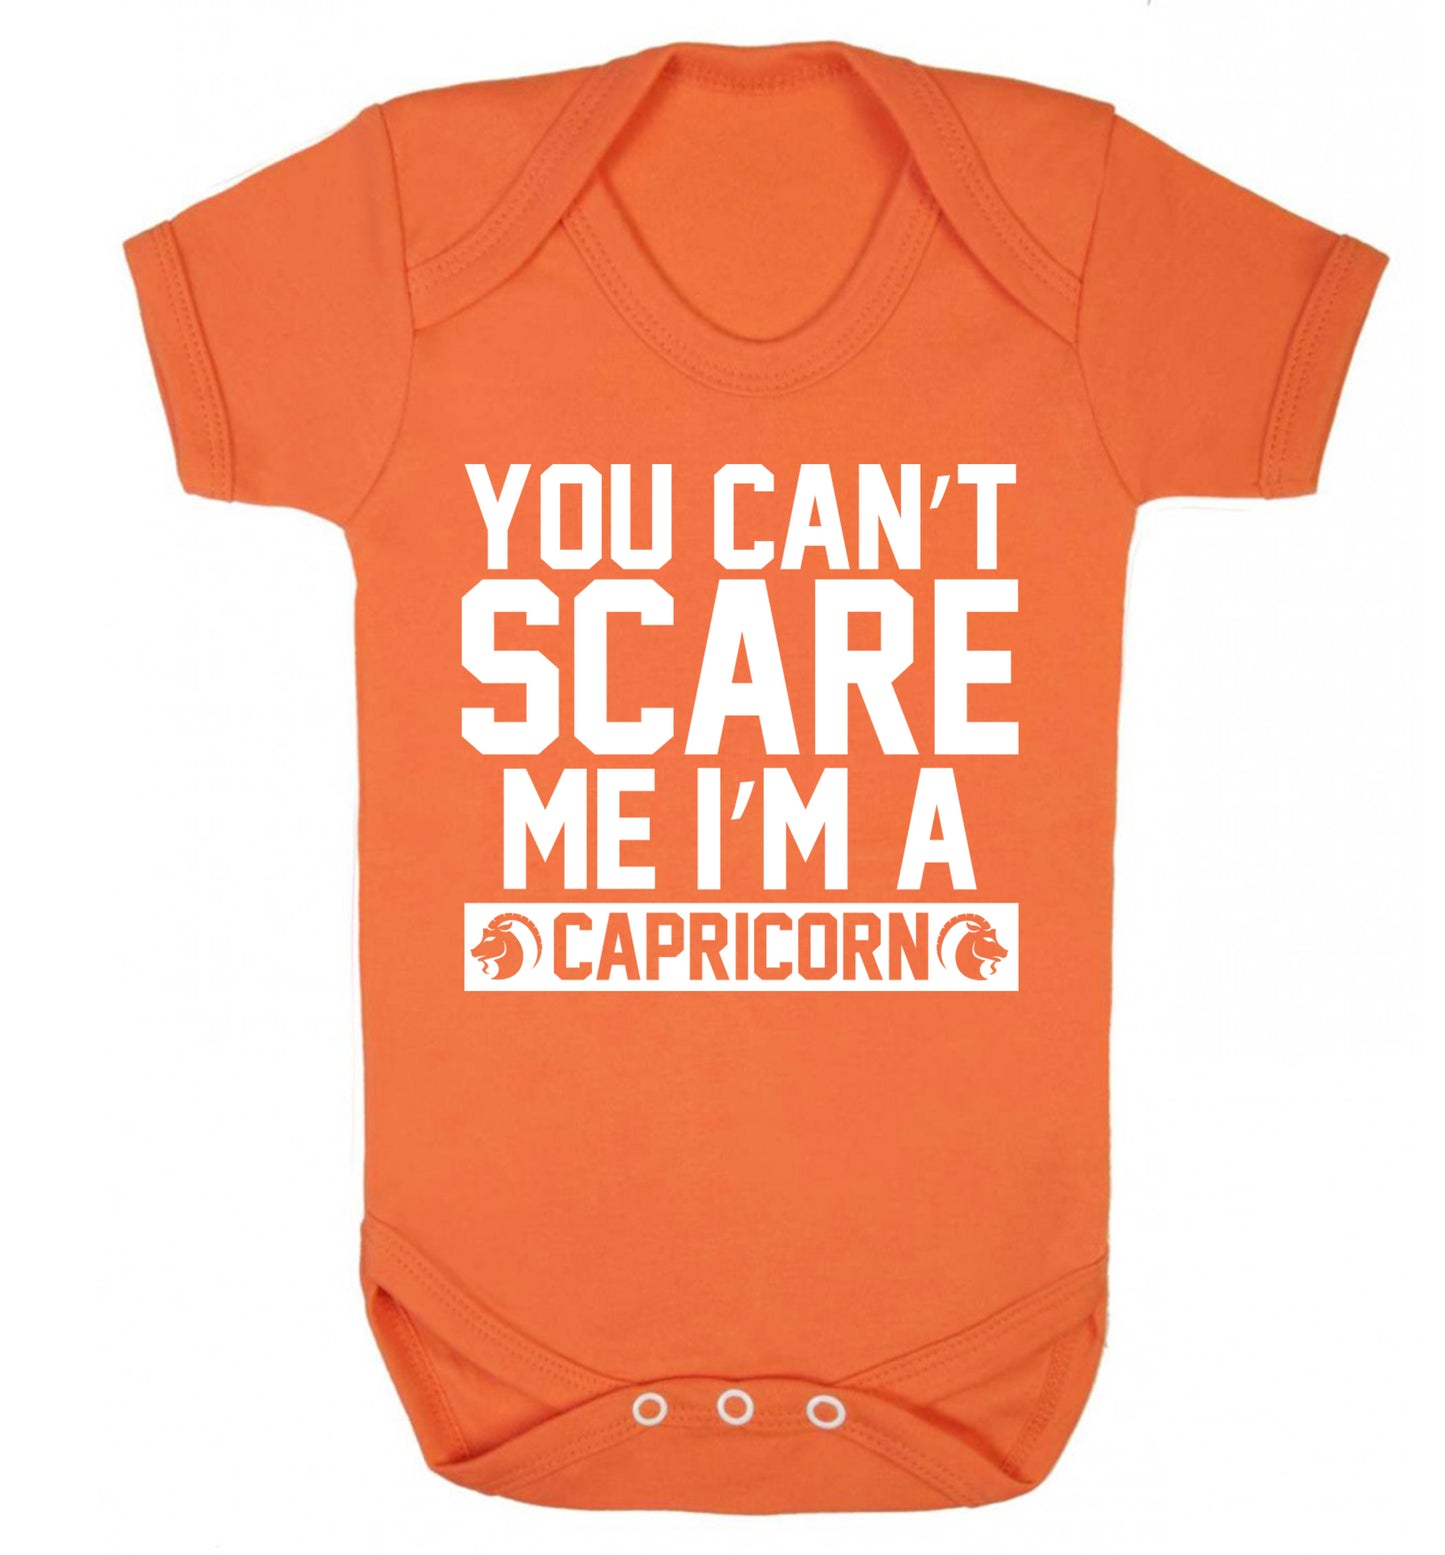 You can't scare me I'm a capricorn Baby Vest orange 18-24 months